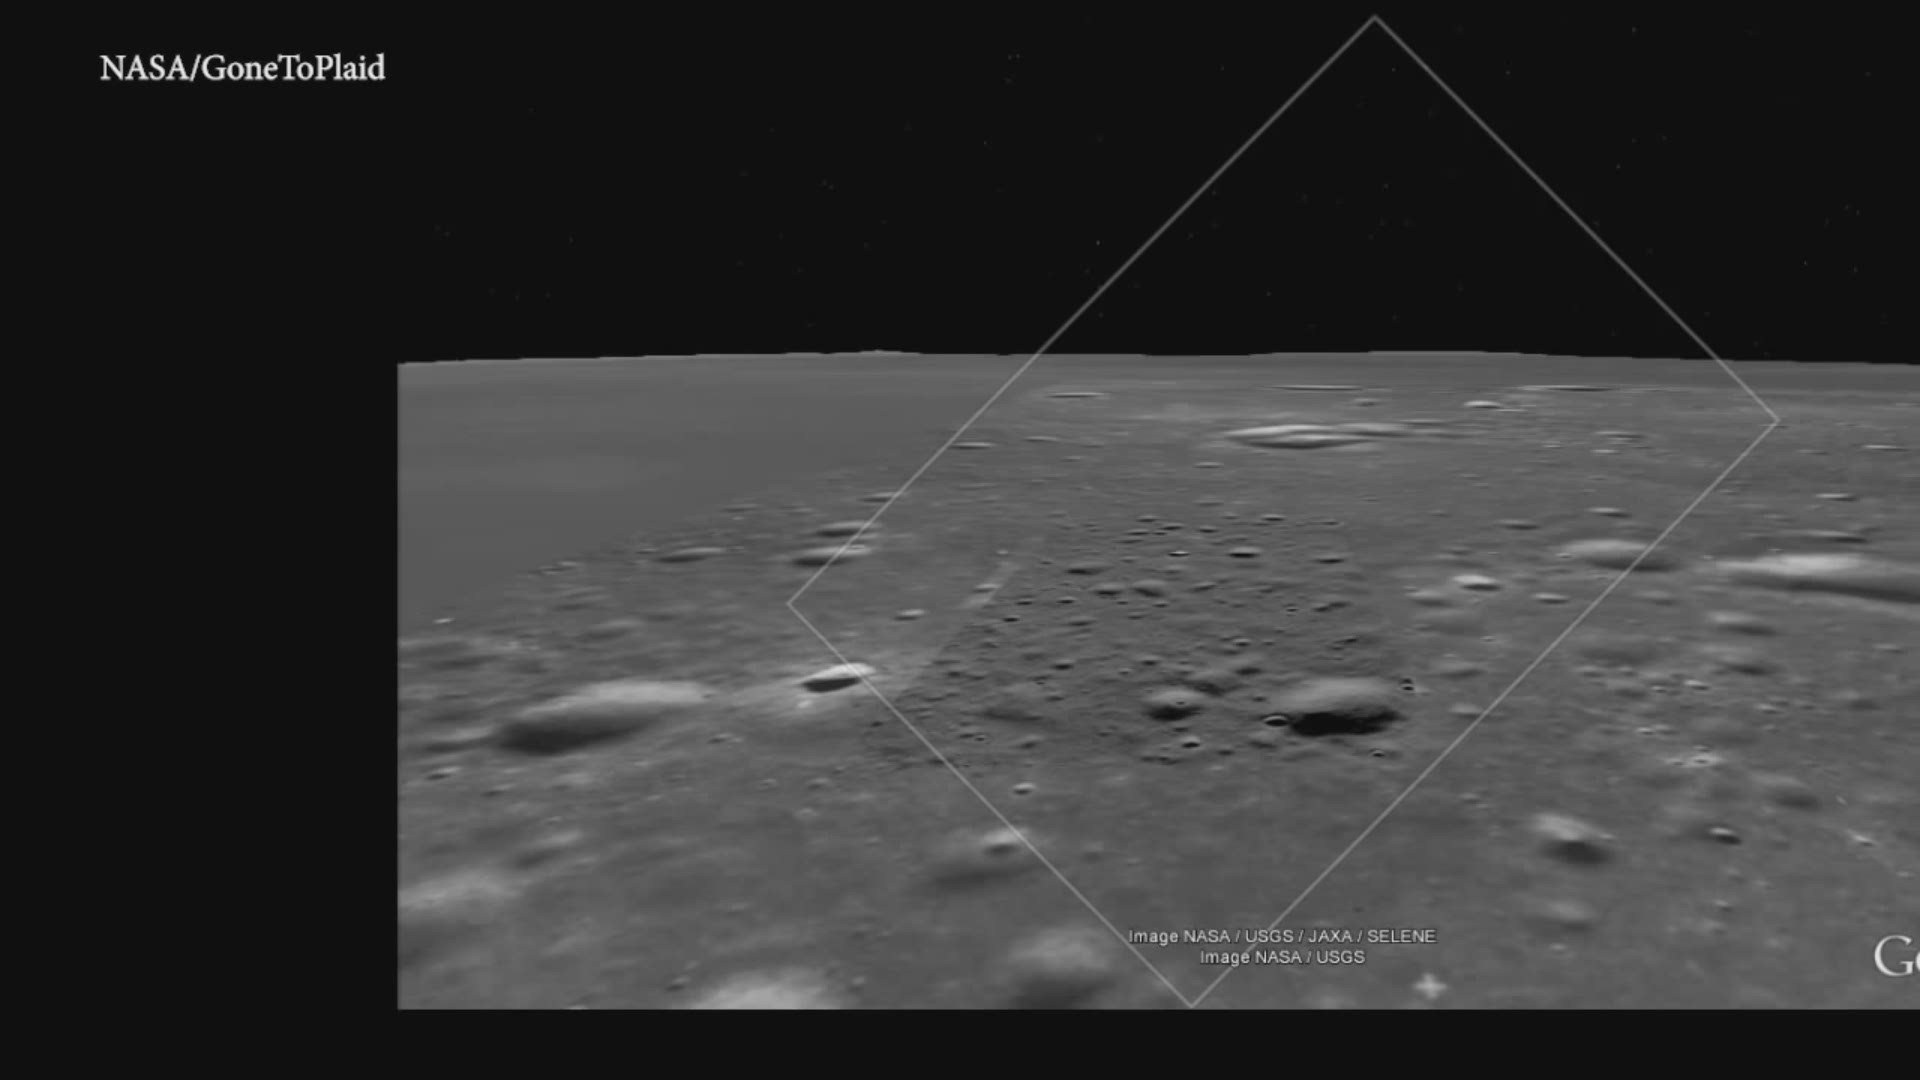 Apollo 11's lunar landing on July 20, 1969. This side-by-side view shows the view from the lunar module's window with a reconstructed panorama. (Courtesy: NASA and GoneToPlaid)